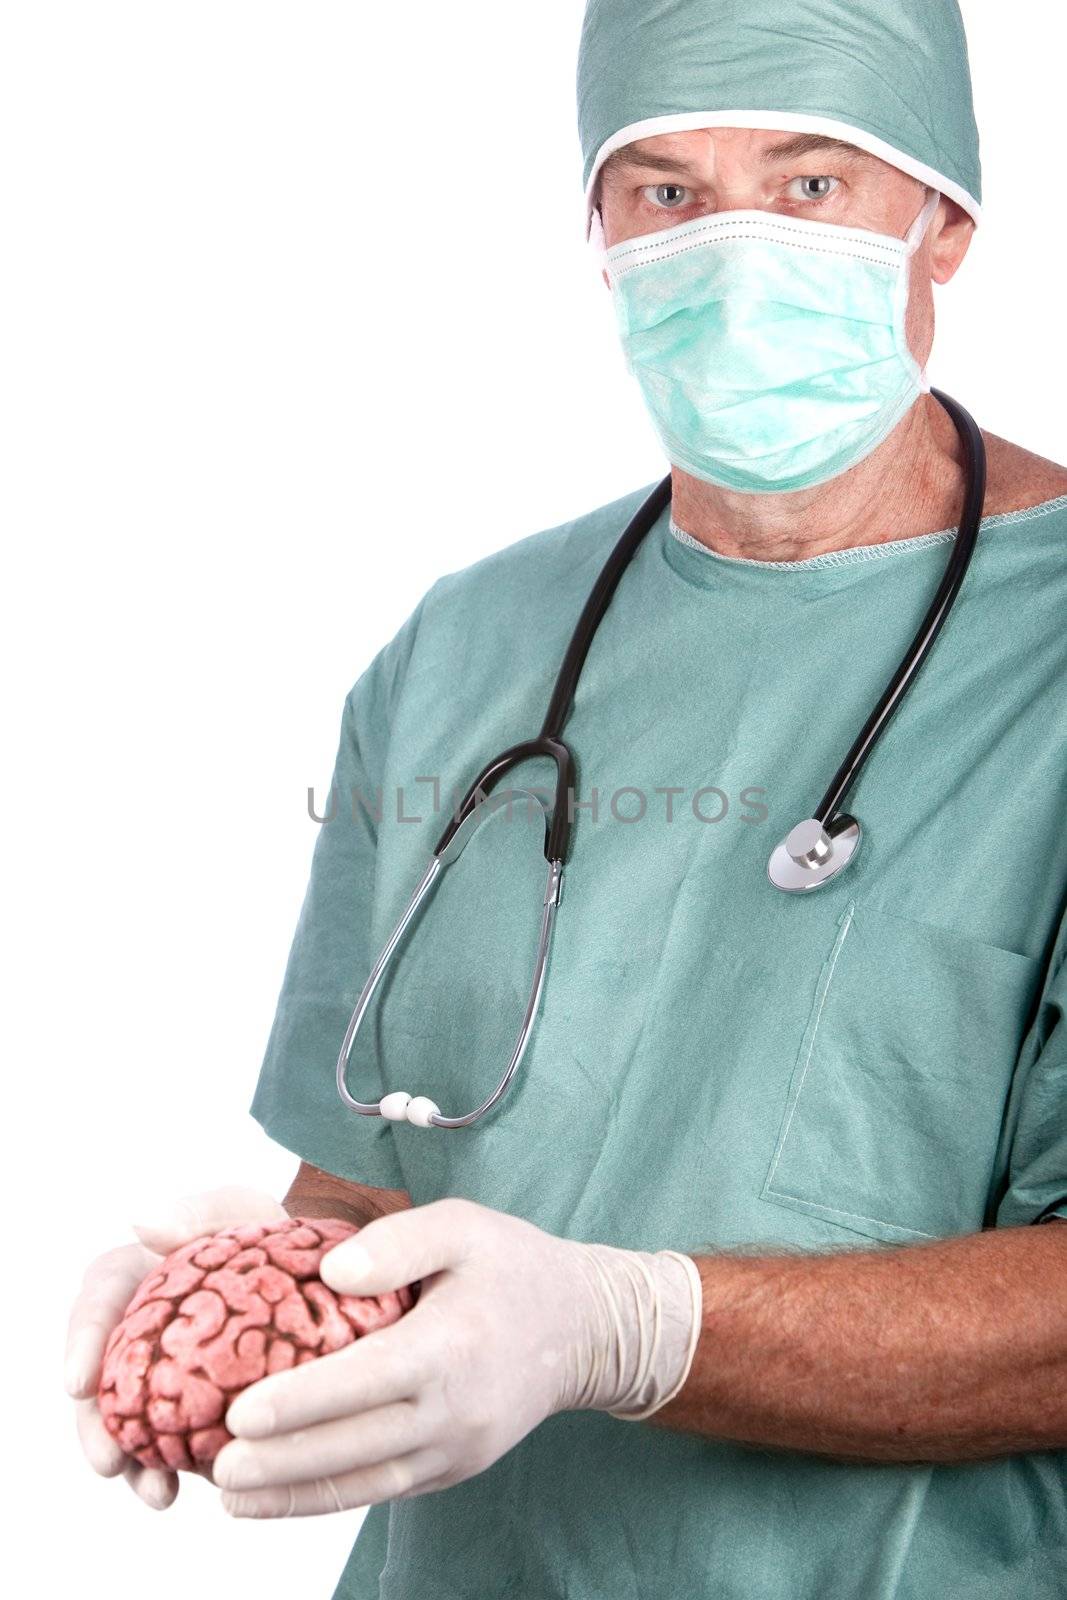 A 60 year old surgeon holding a brain, isolated on a white background.